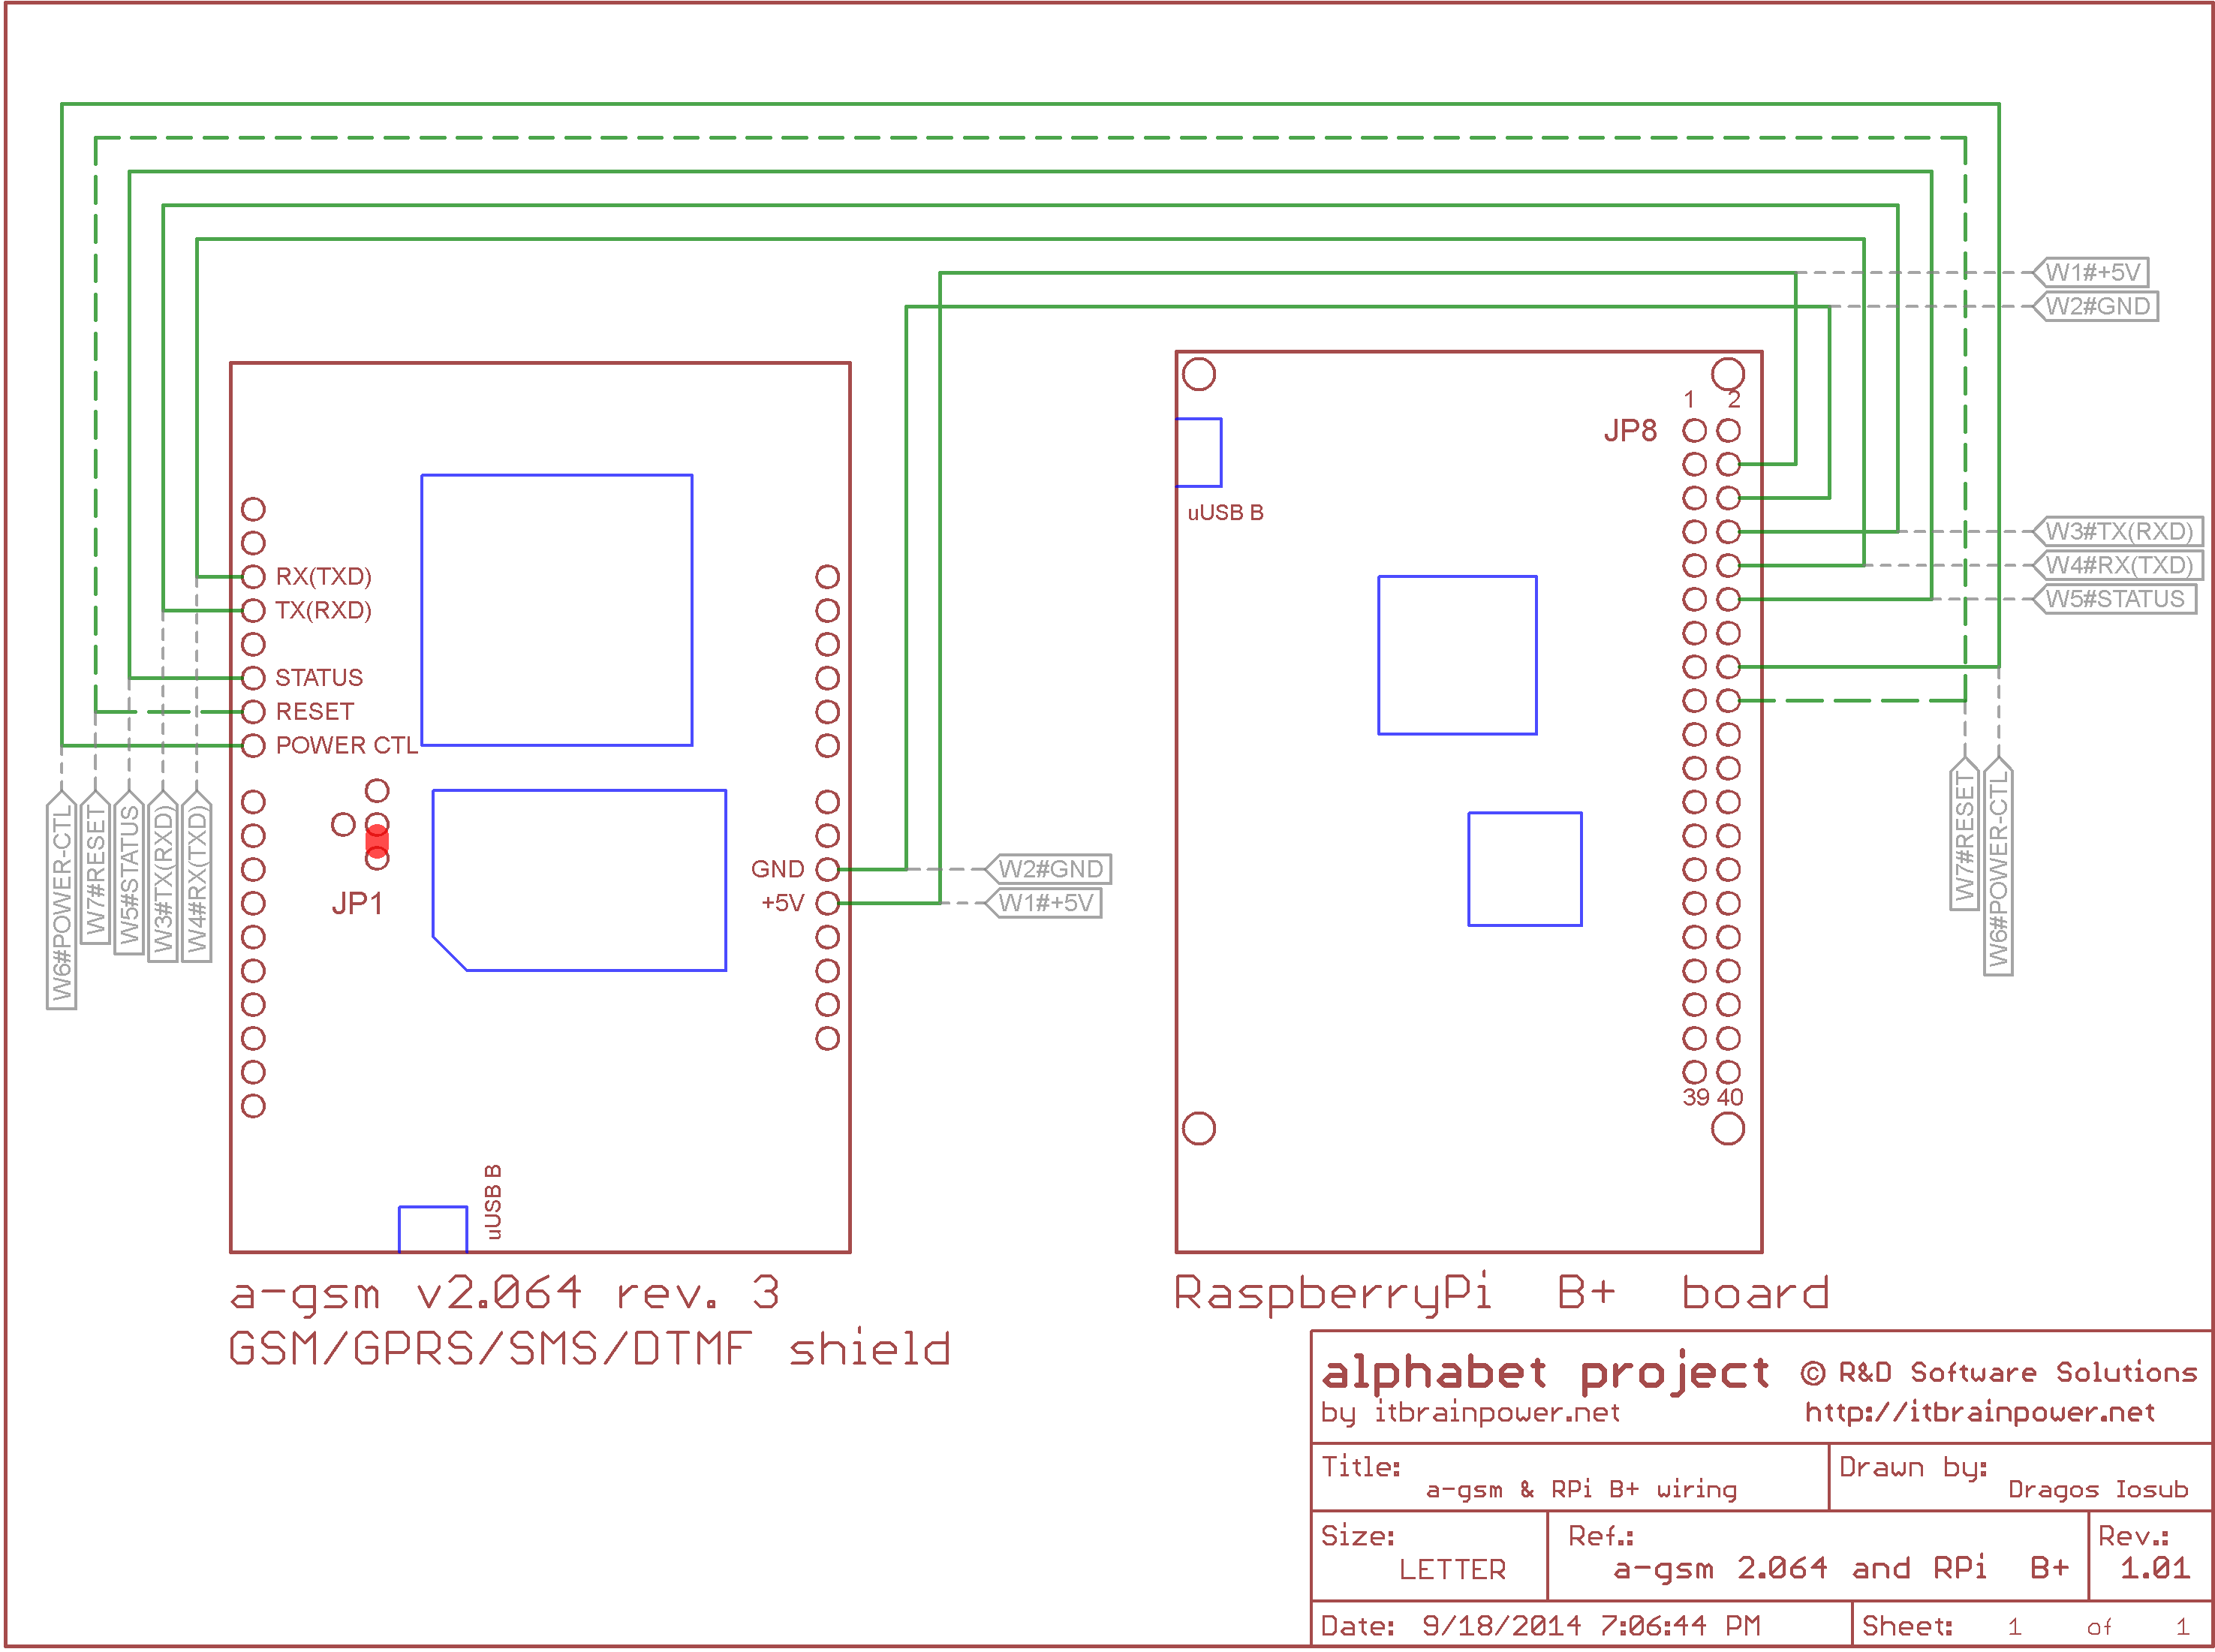 RaspberryPI and a-gsm shield logical wiring reference